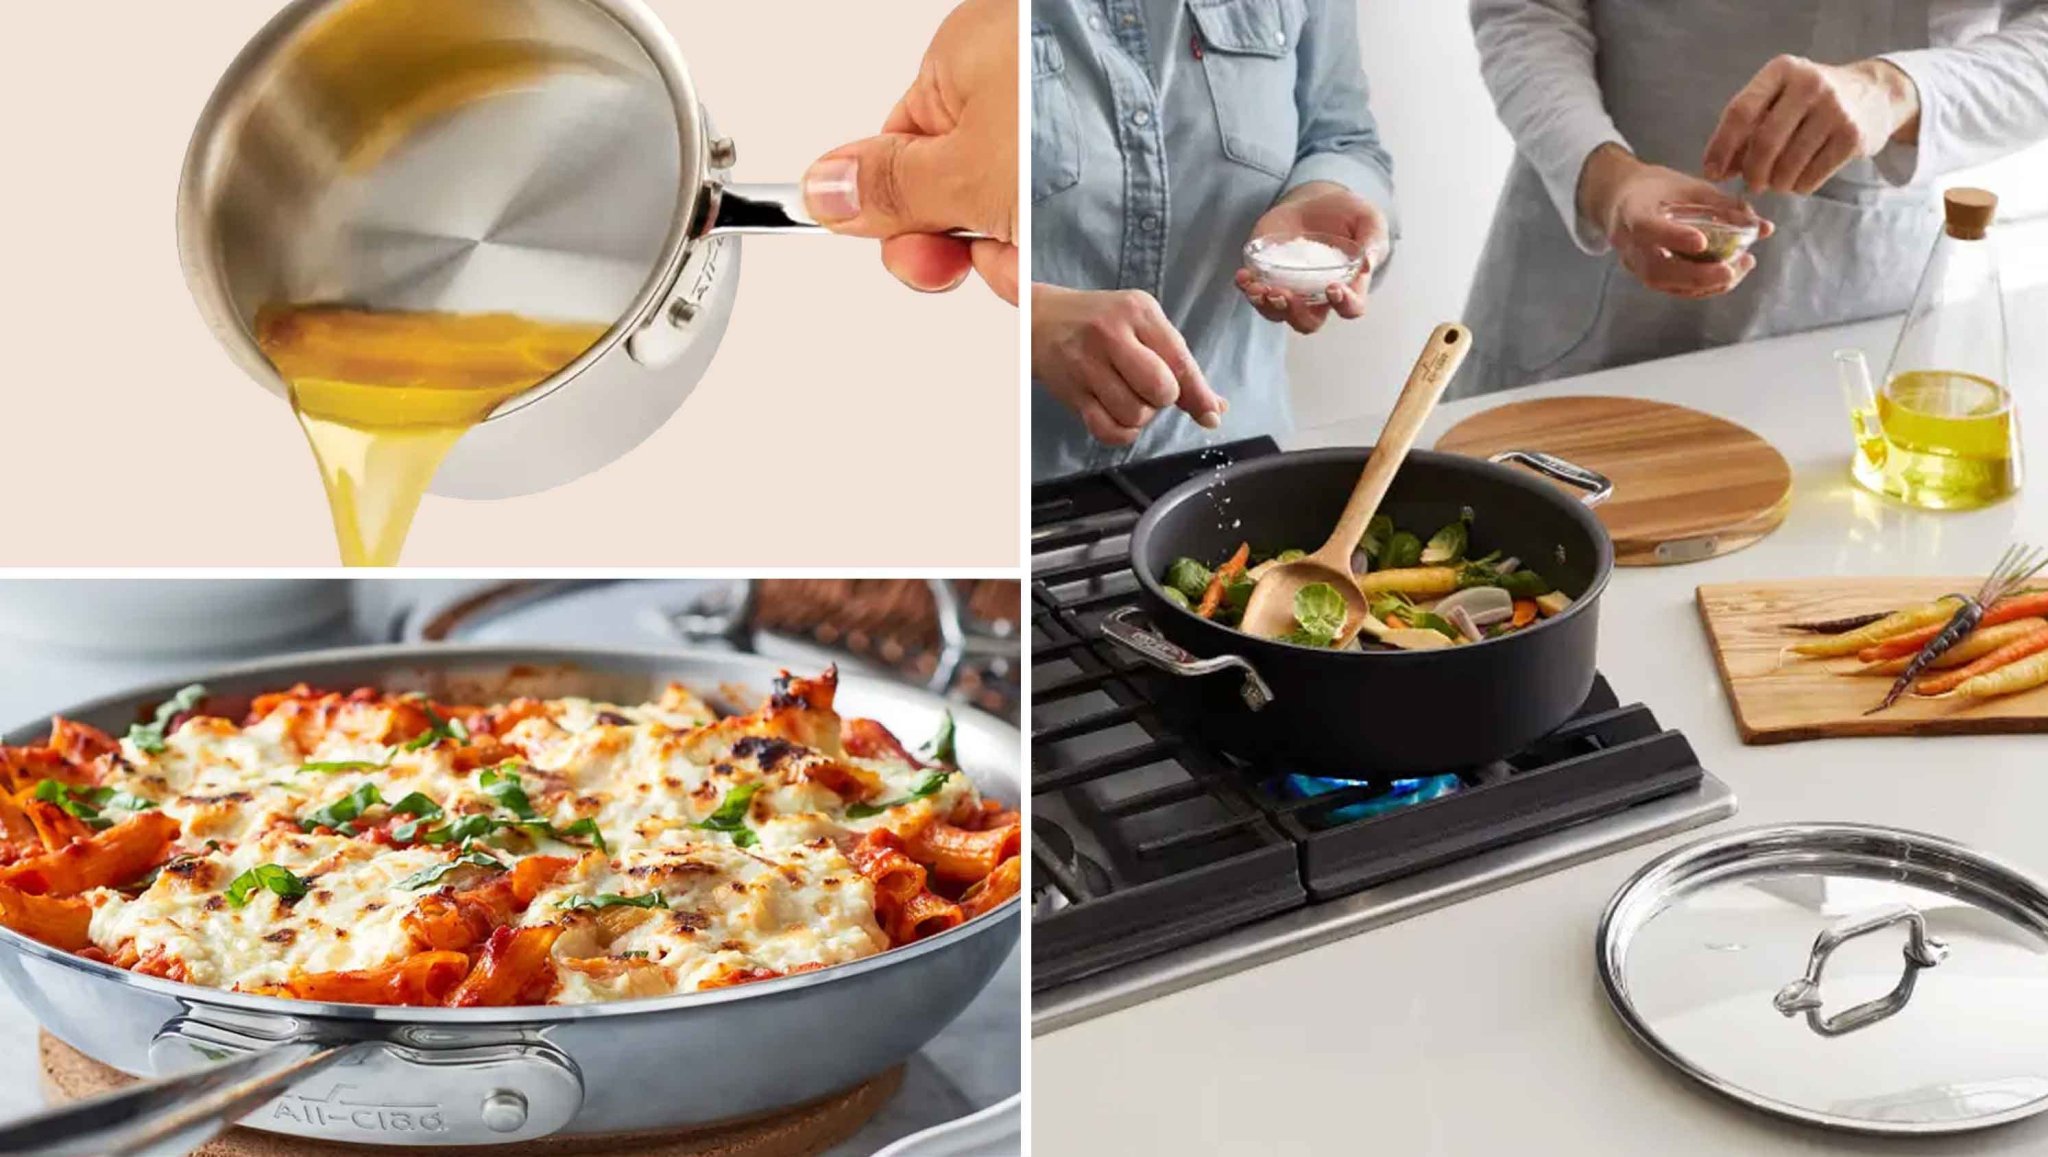 Save up to 77% on quality All-Clad cookware at this tasty August warehouse sale